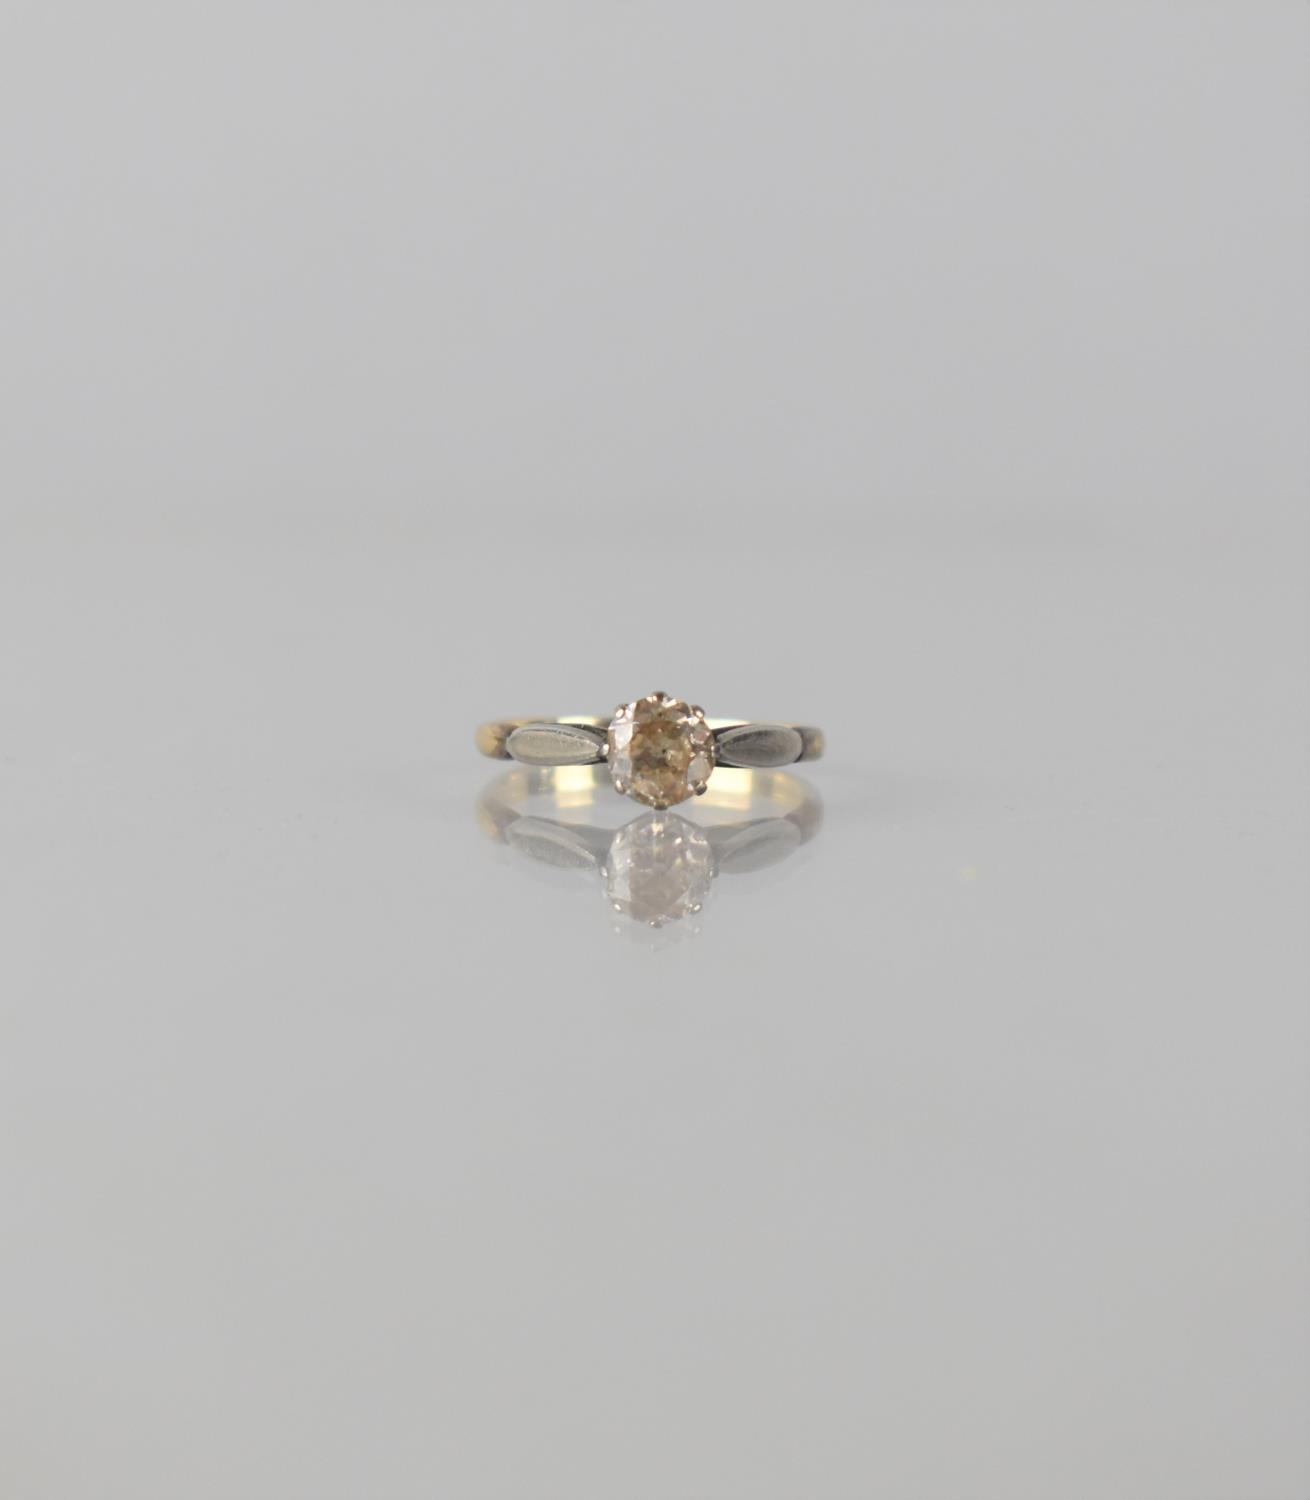 A Diamond Solitaire Ring, Round Brilliant Cut Stone Measuring Approx 0.50ct in Raised Eight Claw